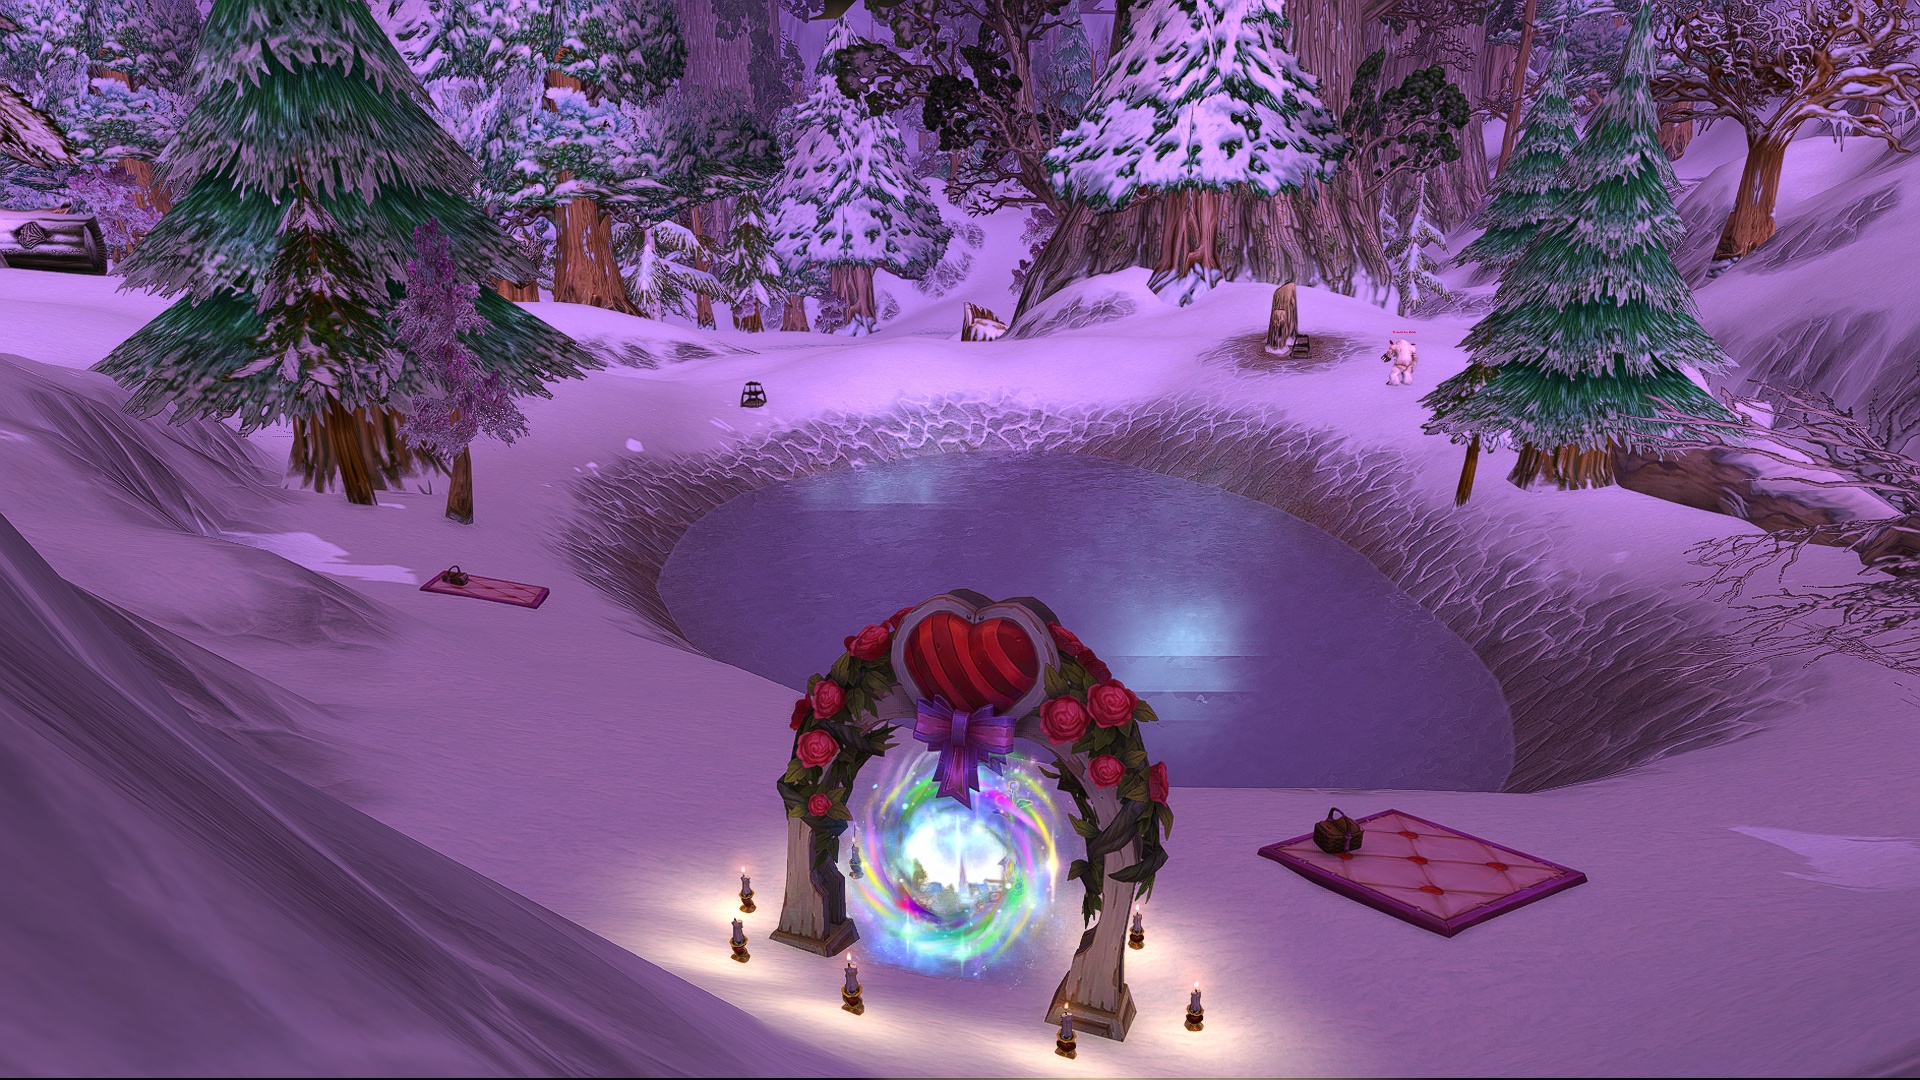 Scenic Getaways - Daily Romantic Locations During Love is in the Air -  Wowhead News